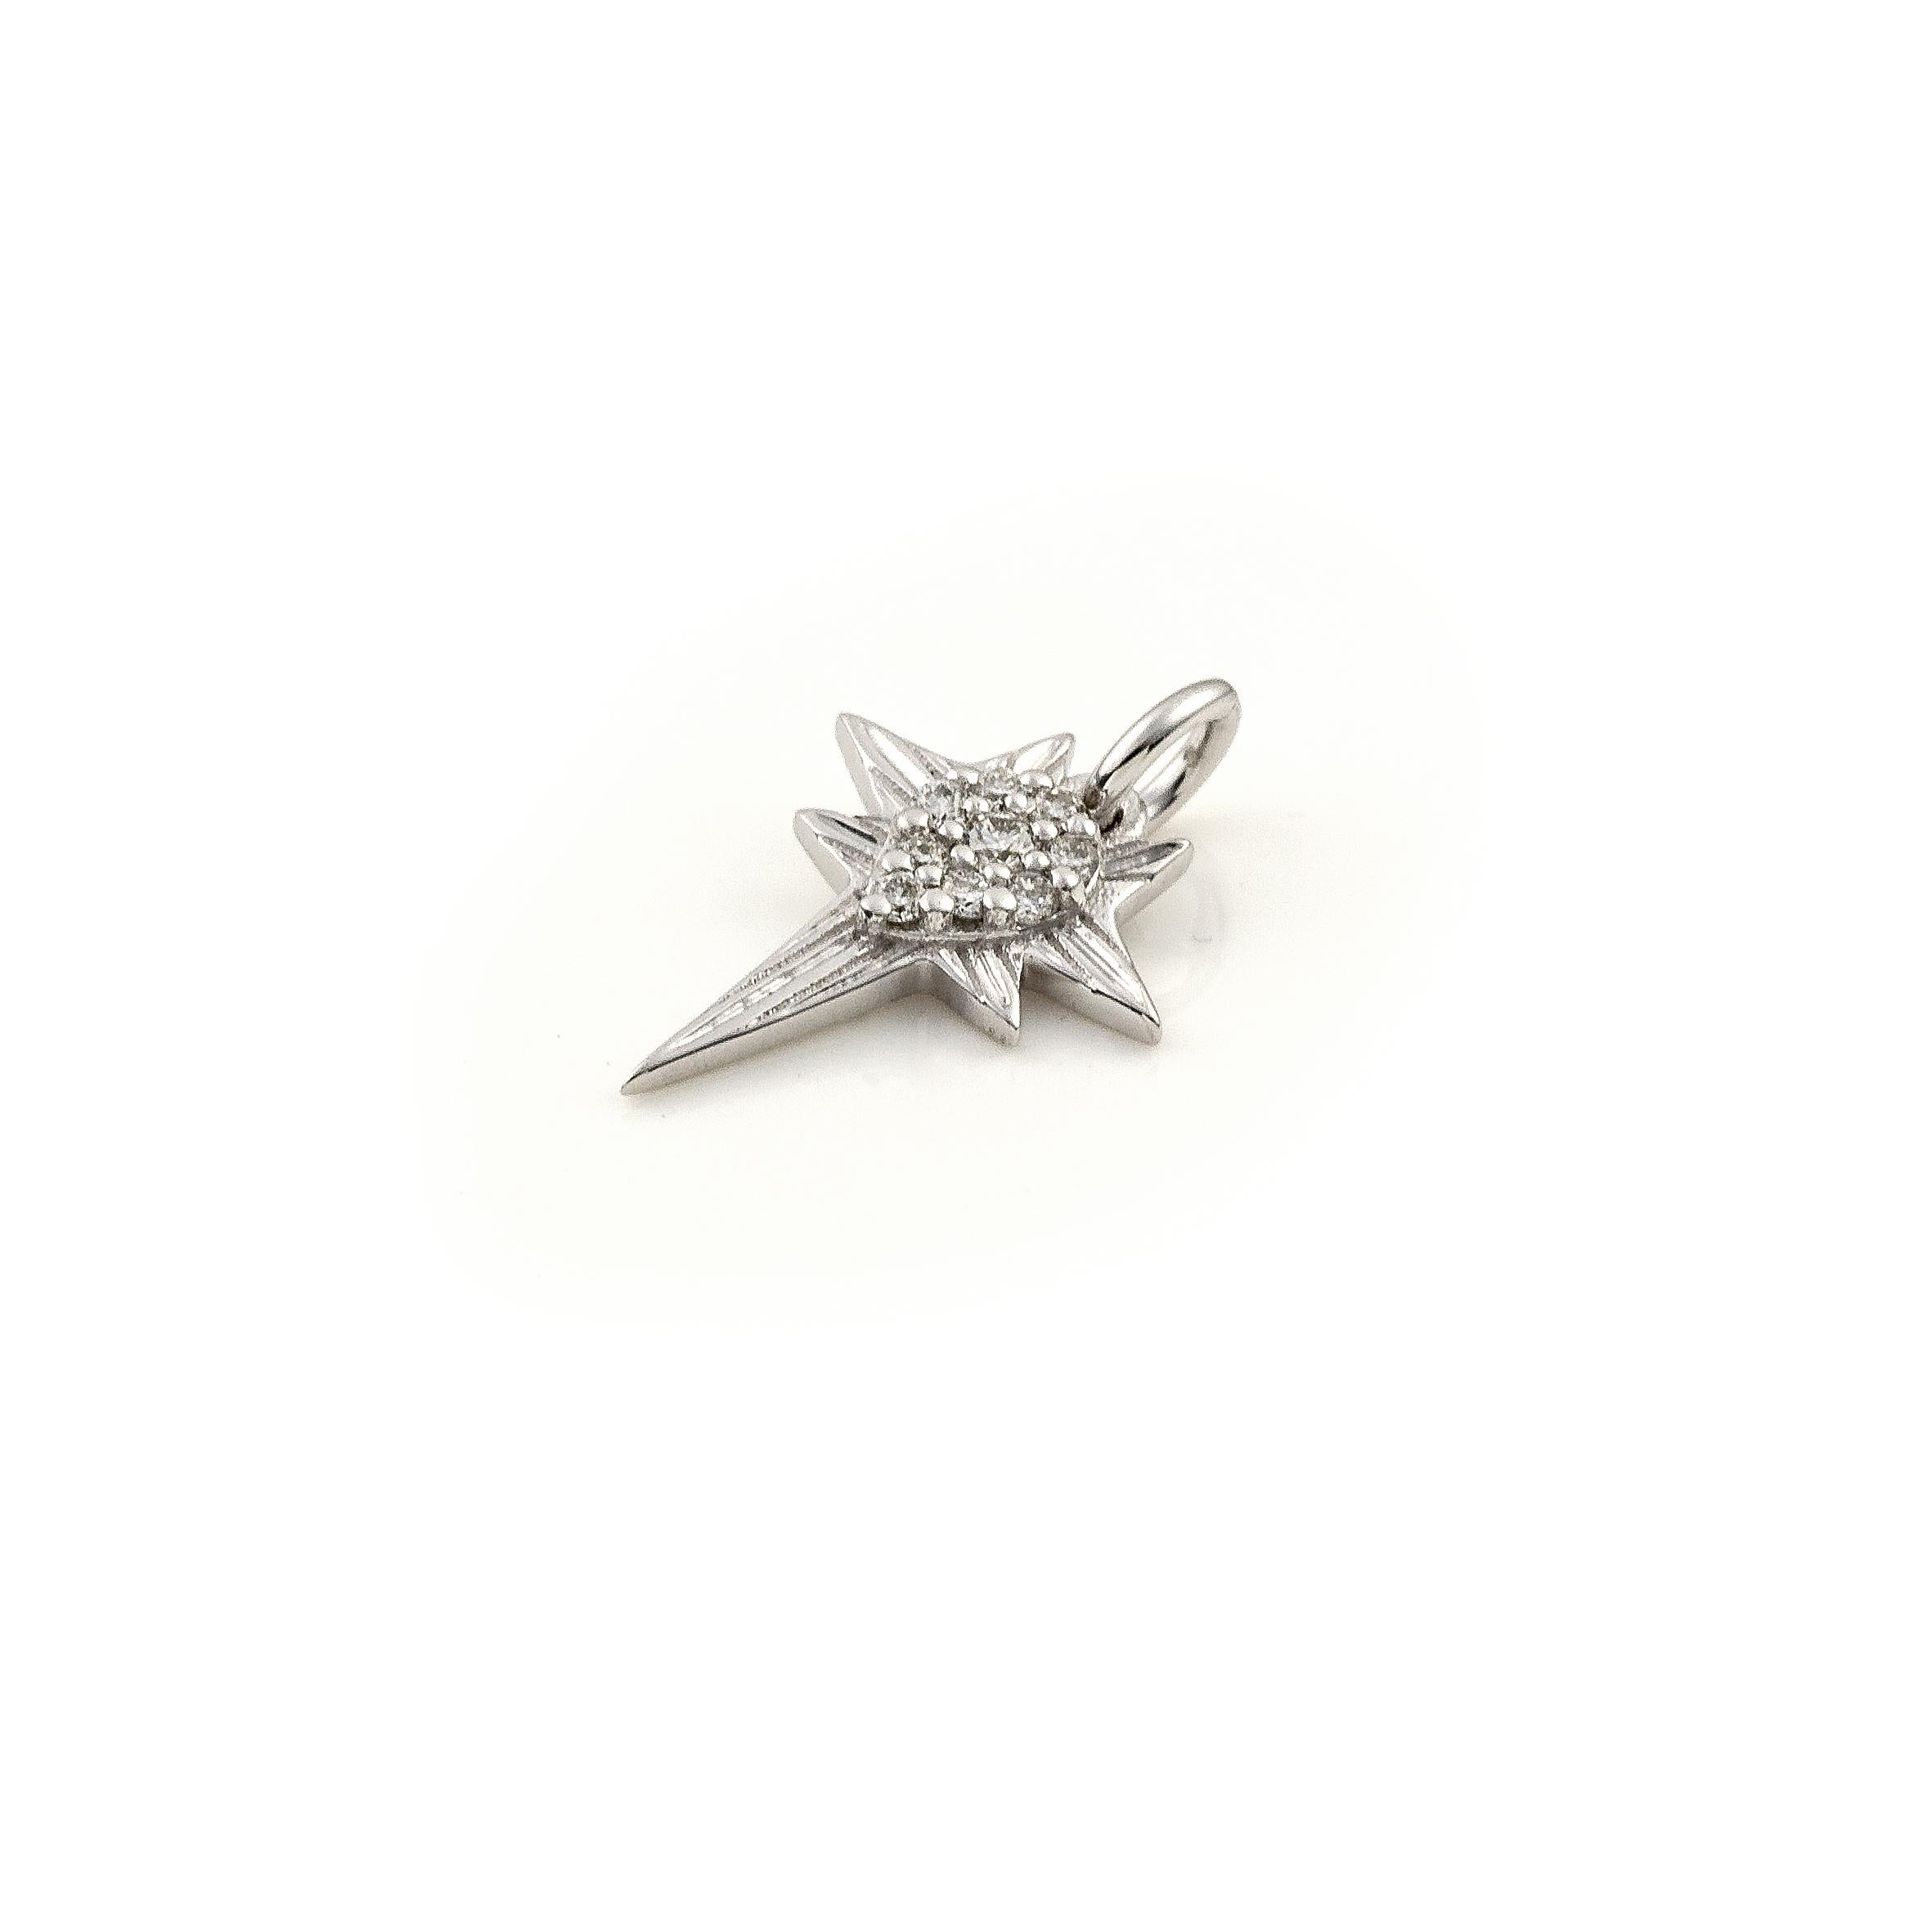 Recycled 14K White Gold

Diamonds Approx. 0.1 ct

Star Size: 1.5 x1.1 cm/ 0.59 x0.43 inches

The pendant is sold WITHOUT a chain.

Rock Star Pendant in White Gold and Diamonds

This will protect you from all evil…

A groundbreaking collection,